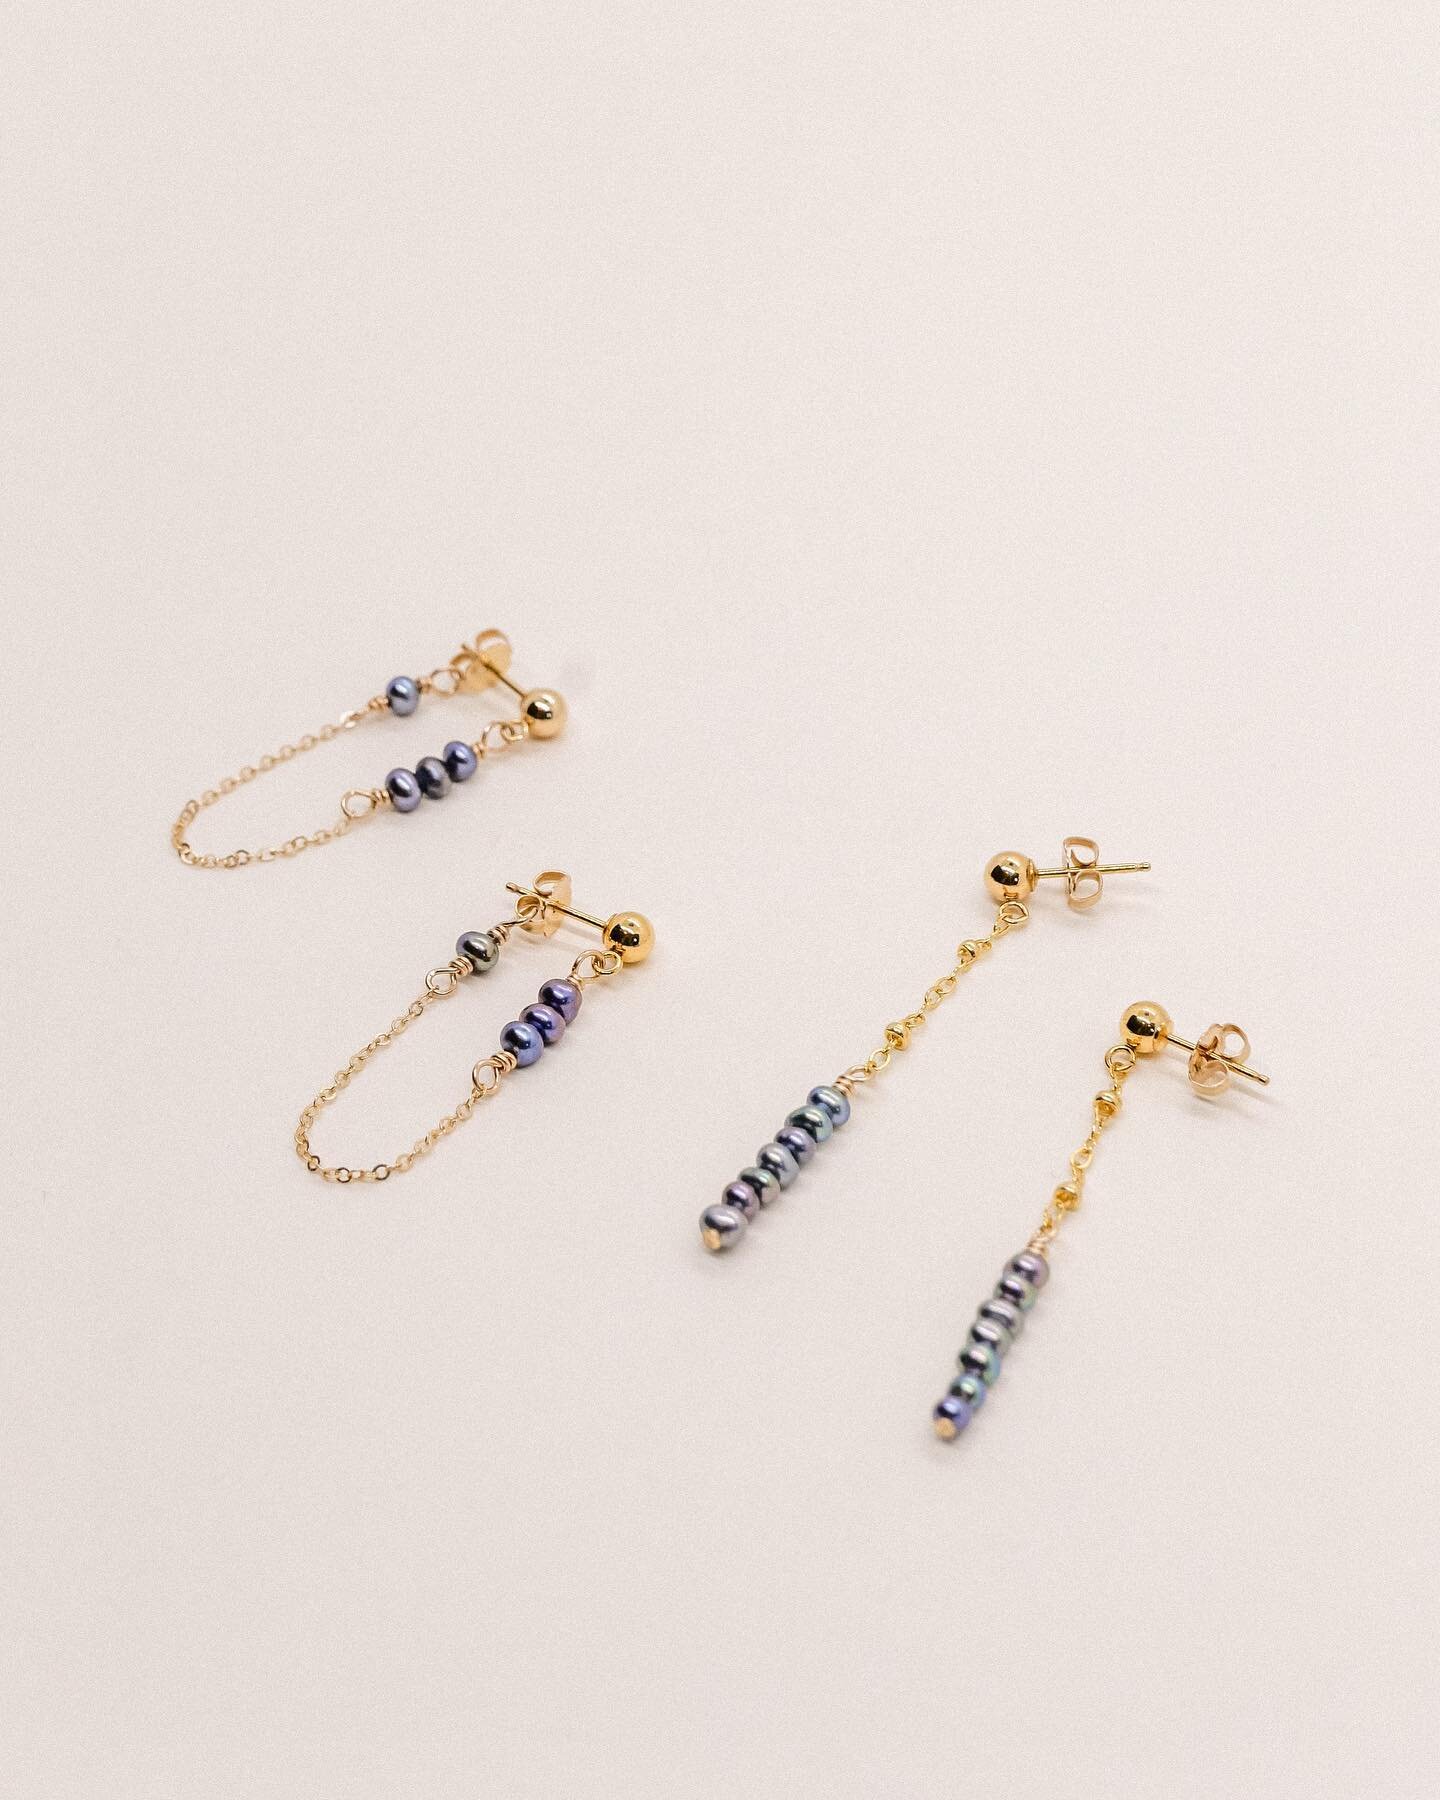 Only fitting we release new designs for our Anniversary Sale. Meet the Malia and Nalani earrings 🤍🤍

Available now! Tap the link in our bio and hit Shop #clemaeve